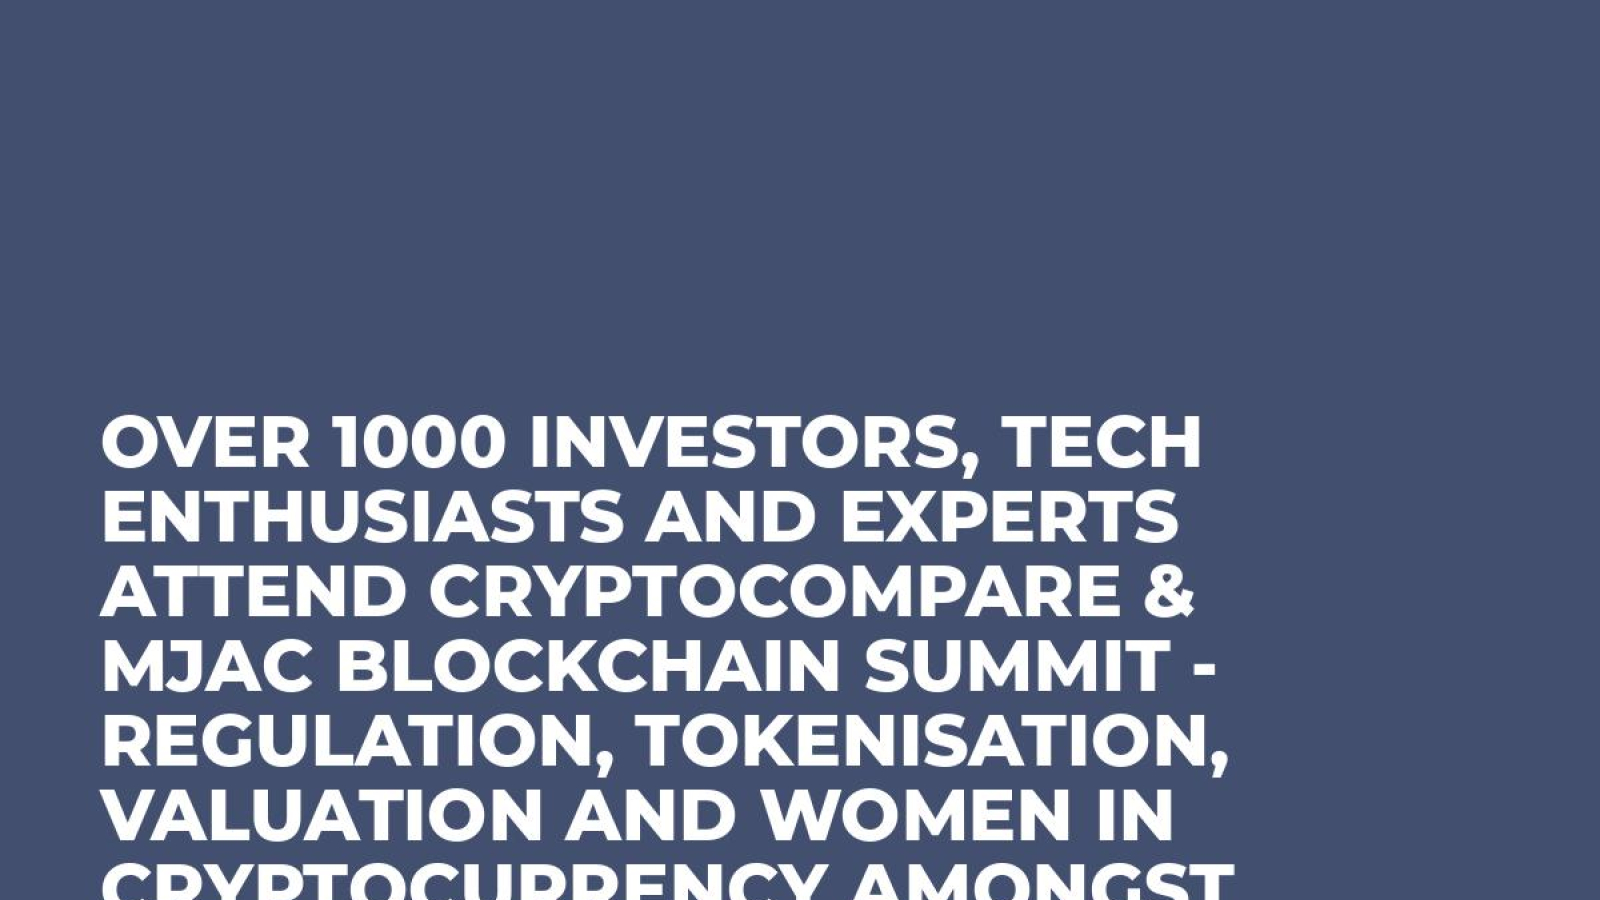 Over 1000 investors, tech enthusiasts and experts attend CryptoCompare & MJAC Blockchain Summit - regulation, tokenisation, valuation and women in  cryptocurrency amongst topics discussed